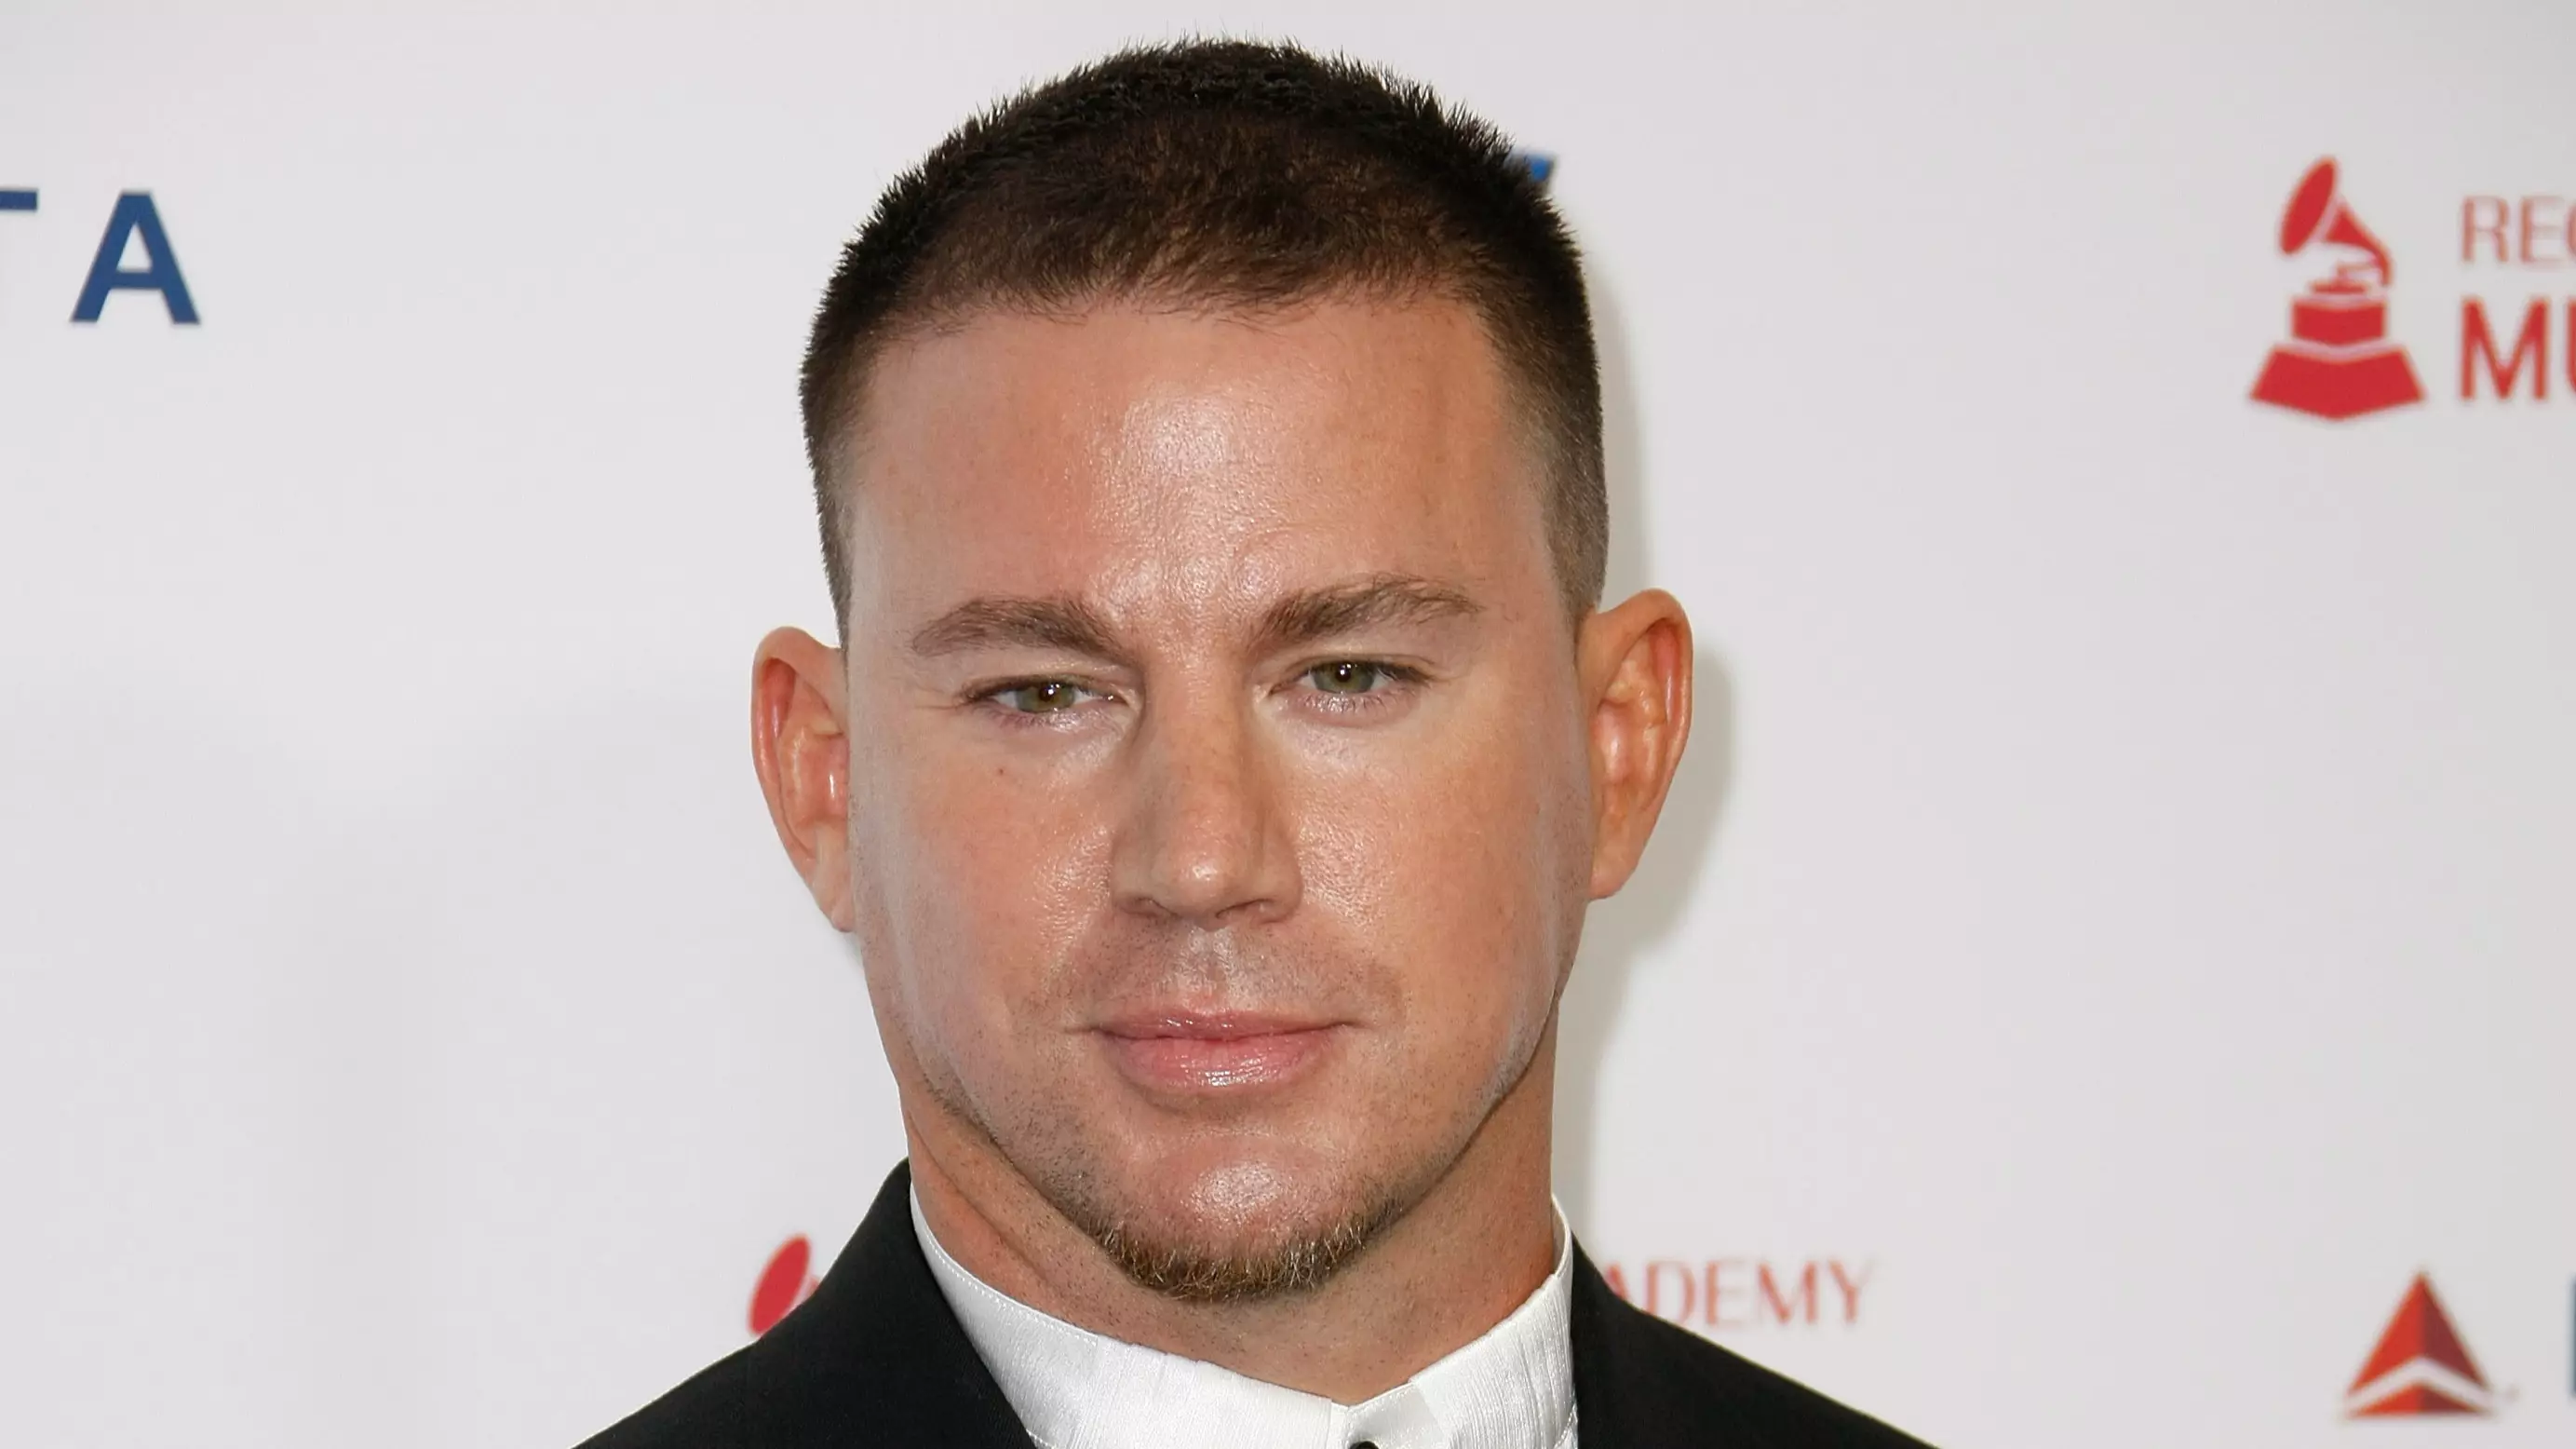 Everyone’s Going Wild Over Channing Tatum’s Latest Shirtless Selfie